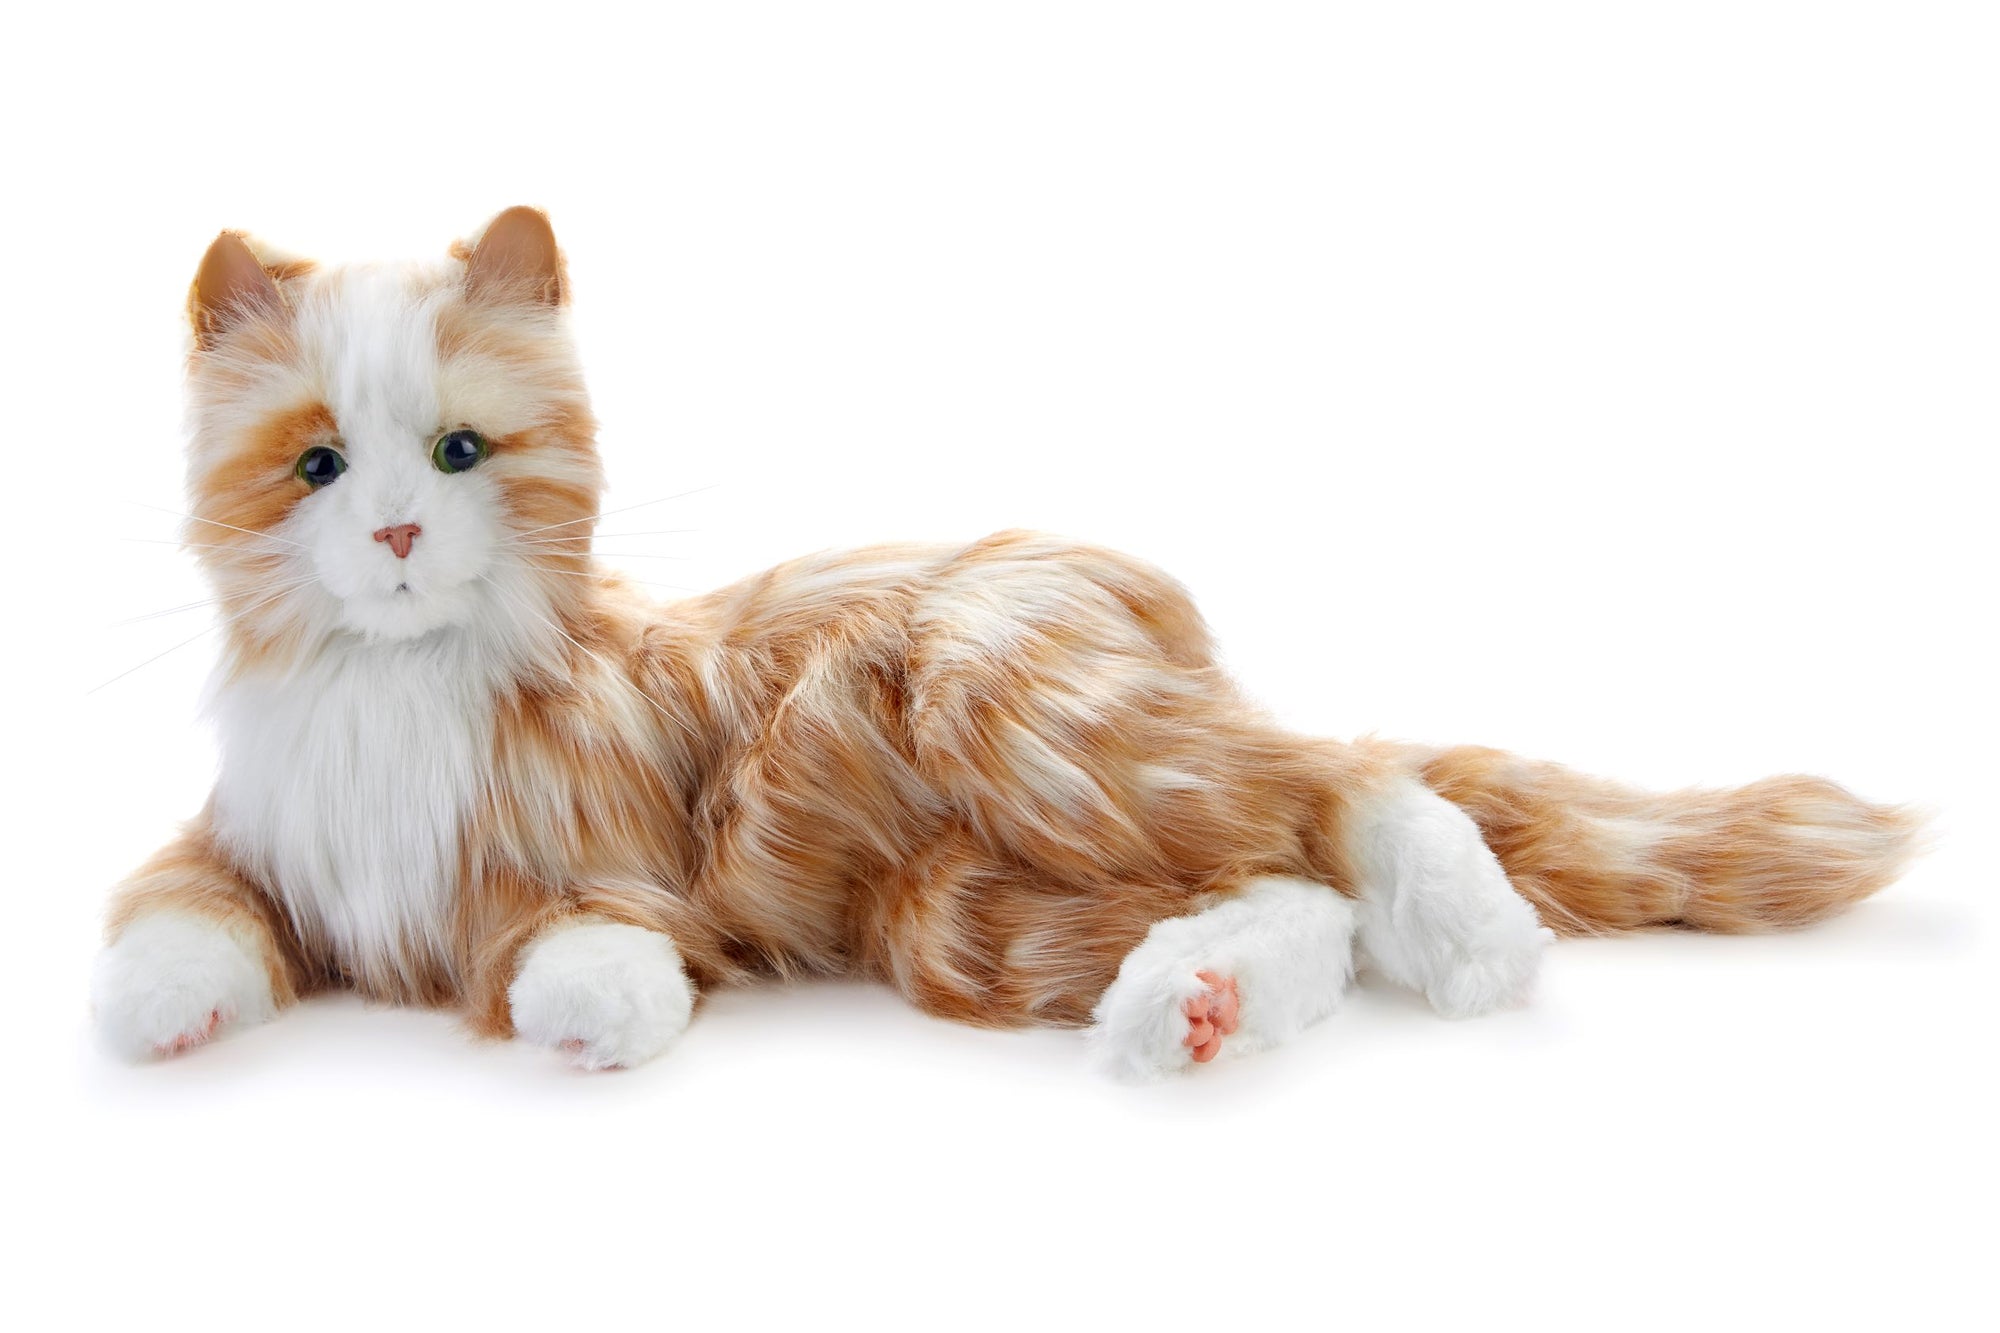 A ginger and white facsimile cat, with 100% synthetic fur, is lying on its side, with its head upright.  The cat has blue eyes, a white muzzle and pink nose and looks directly at us with an alert expression. It has four white feet, with one foot turned so that the pink pads are visible.